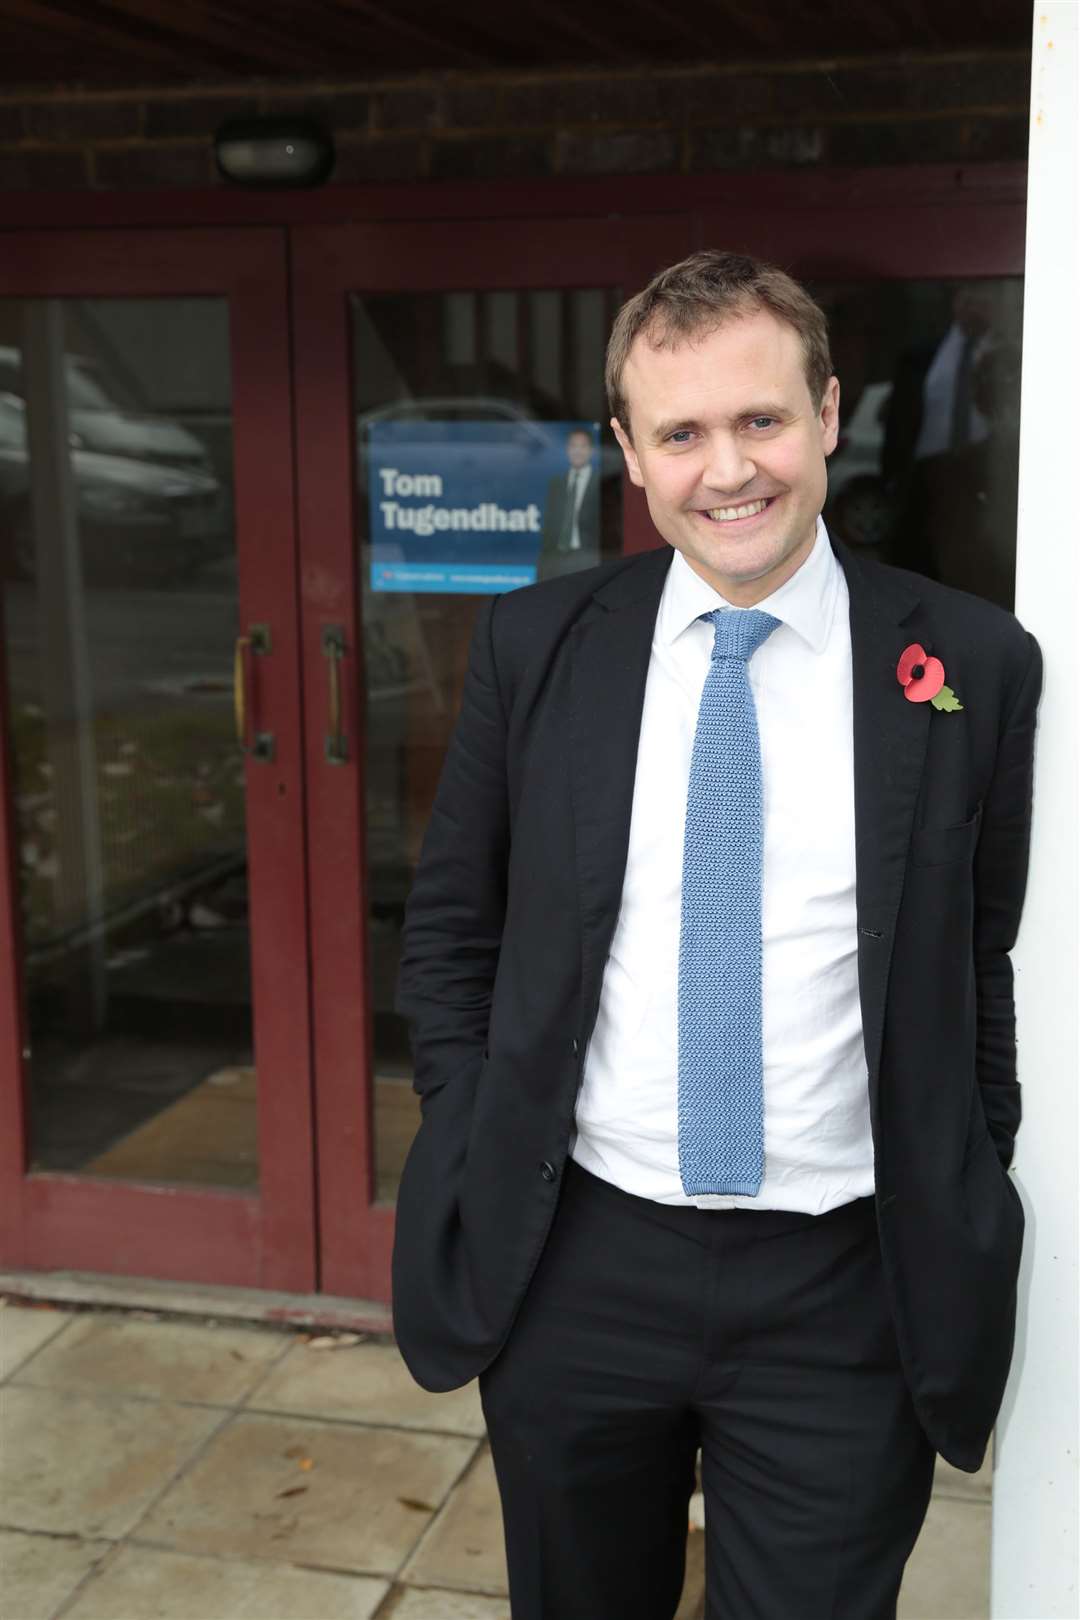 Tom Tugendhat hopes to be re-elected to Tonbridge and Malling come December 12. Picture: Martin Apps